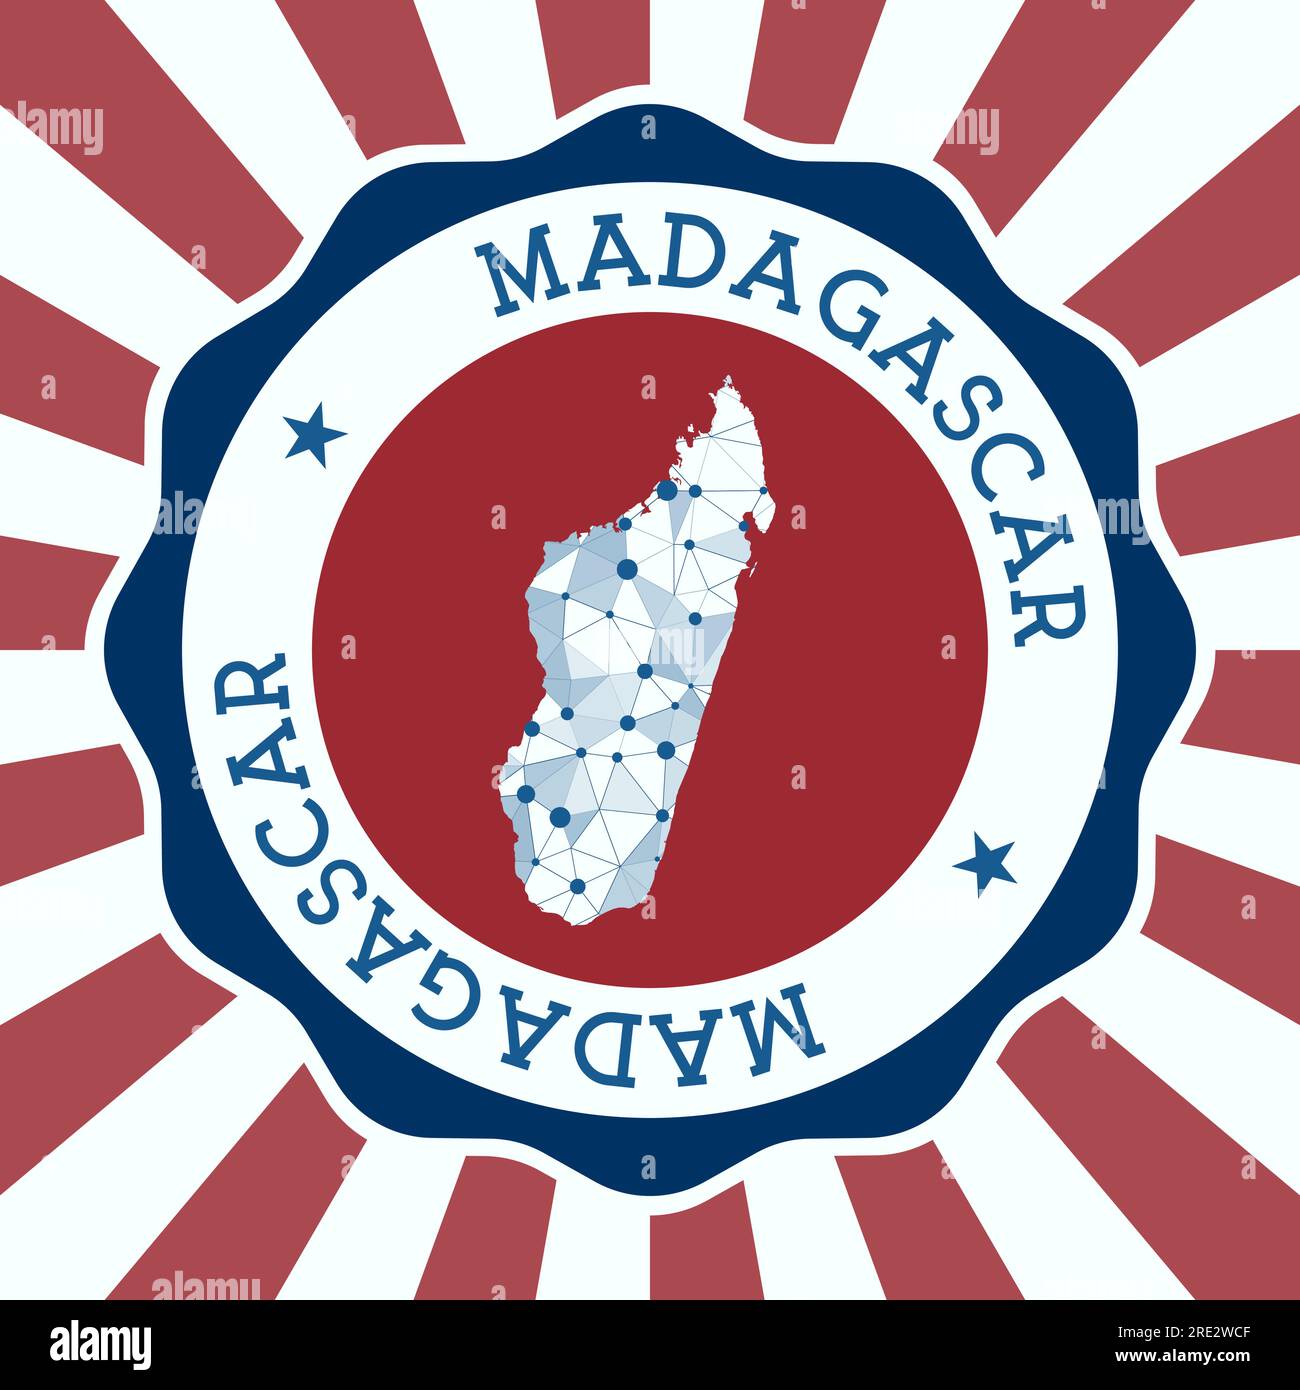 Madagascar Badge. Round logo of country with triangular mesh map and radial rays. EPS10 Vector. Stock Vector